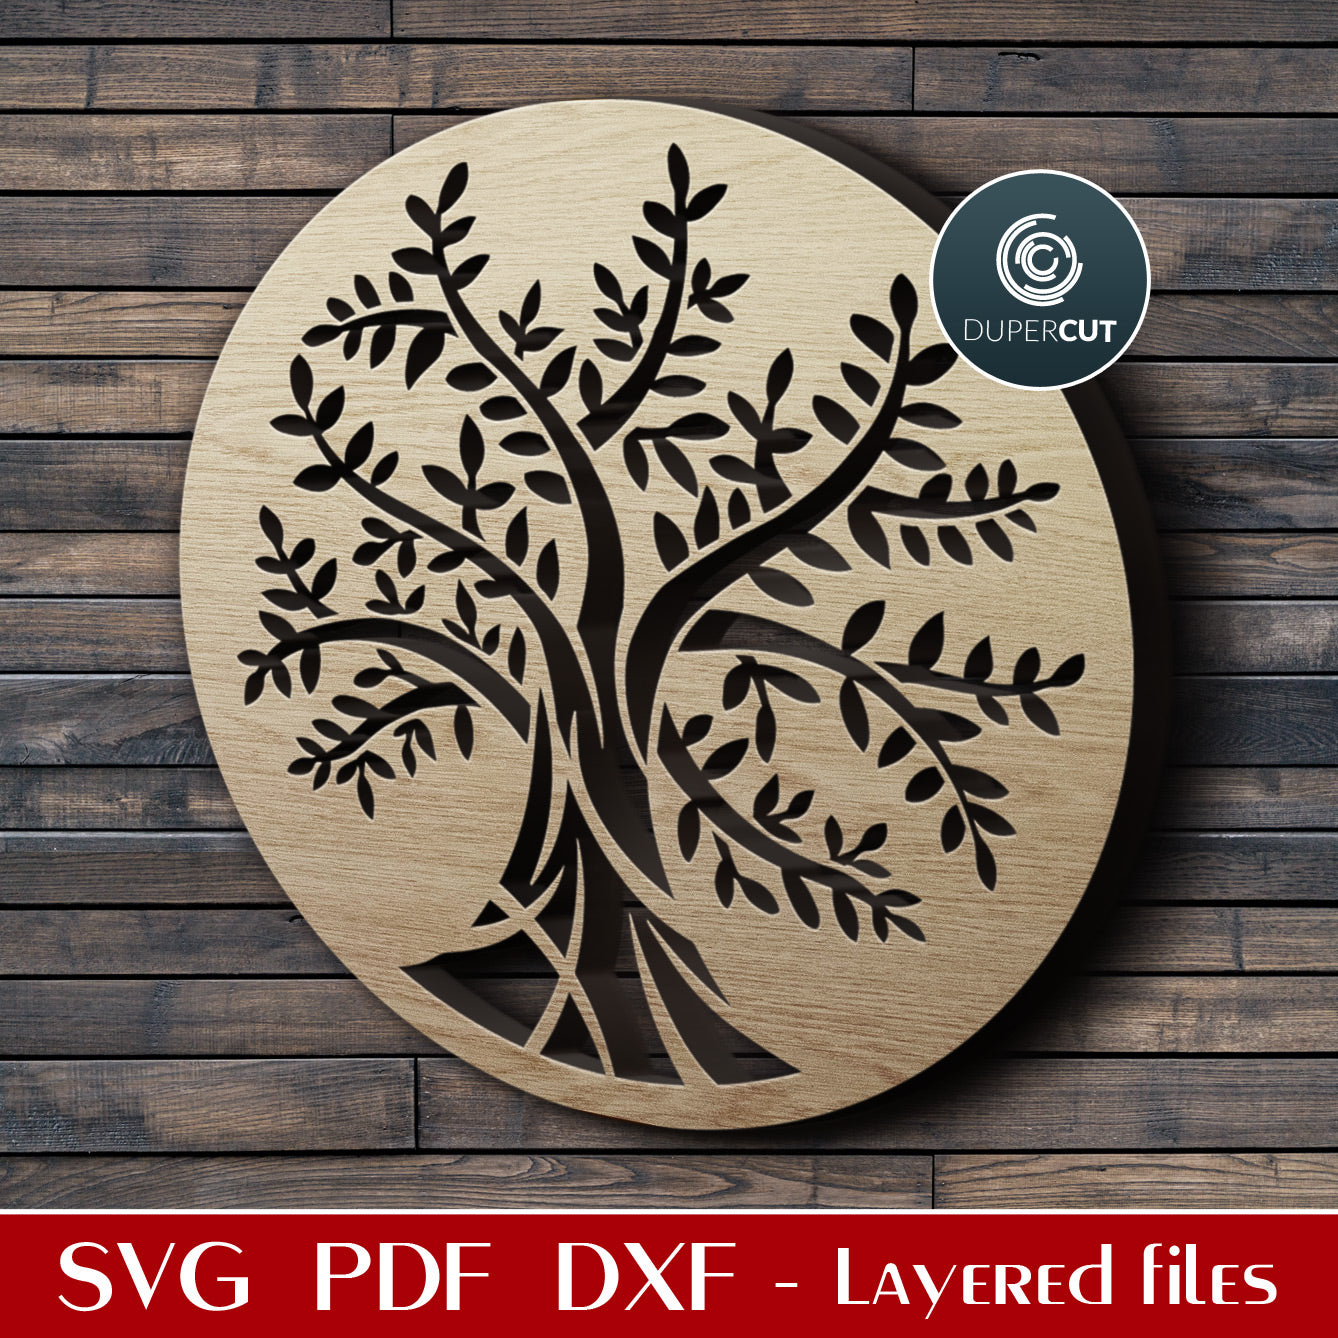 Tree of life round wall decoration stencil design - SVG PDF DXF files for laser cutting machines - Glowforge, CNC plasma, Cricut, Silhouette cameo  by DuperCut